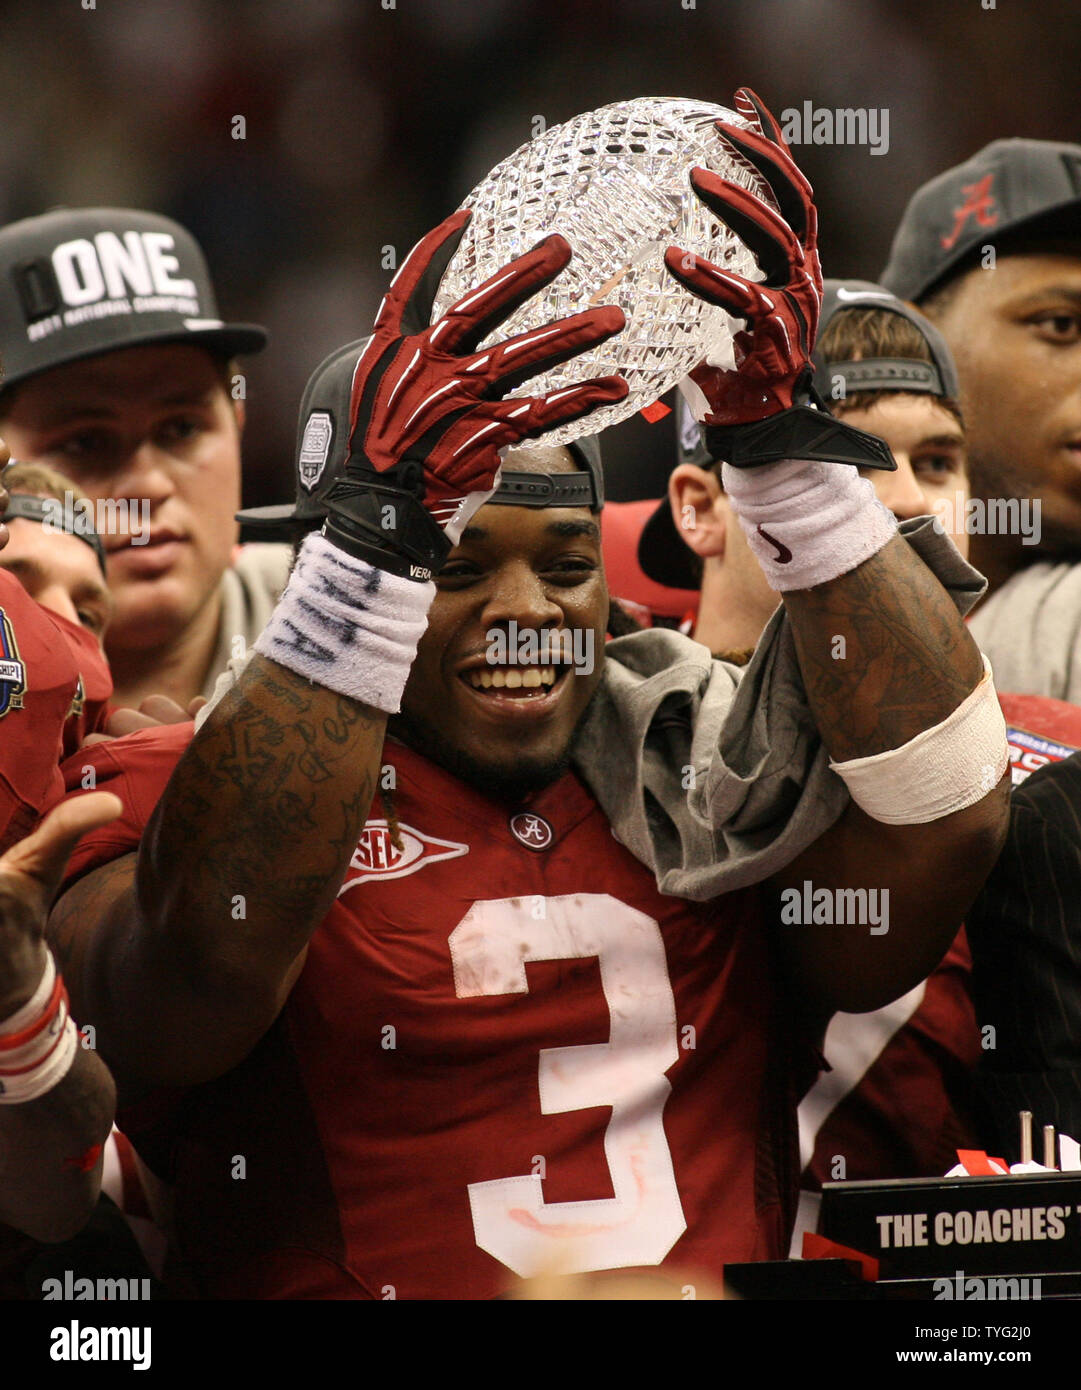 Alabama running back Trent Richardson (3) holds the BCS National  Championship trophy at the Mercedes-Benz Superdome in New Orleans,  Louisiana, on January 9, 2012. The Alabama Crimson Tide beat the LSU Tigers